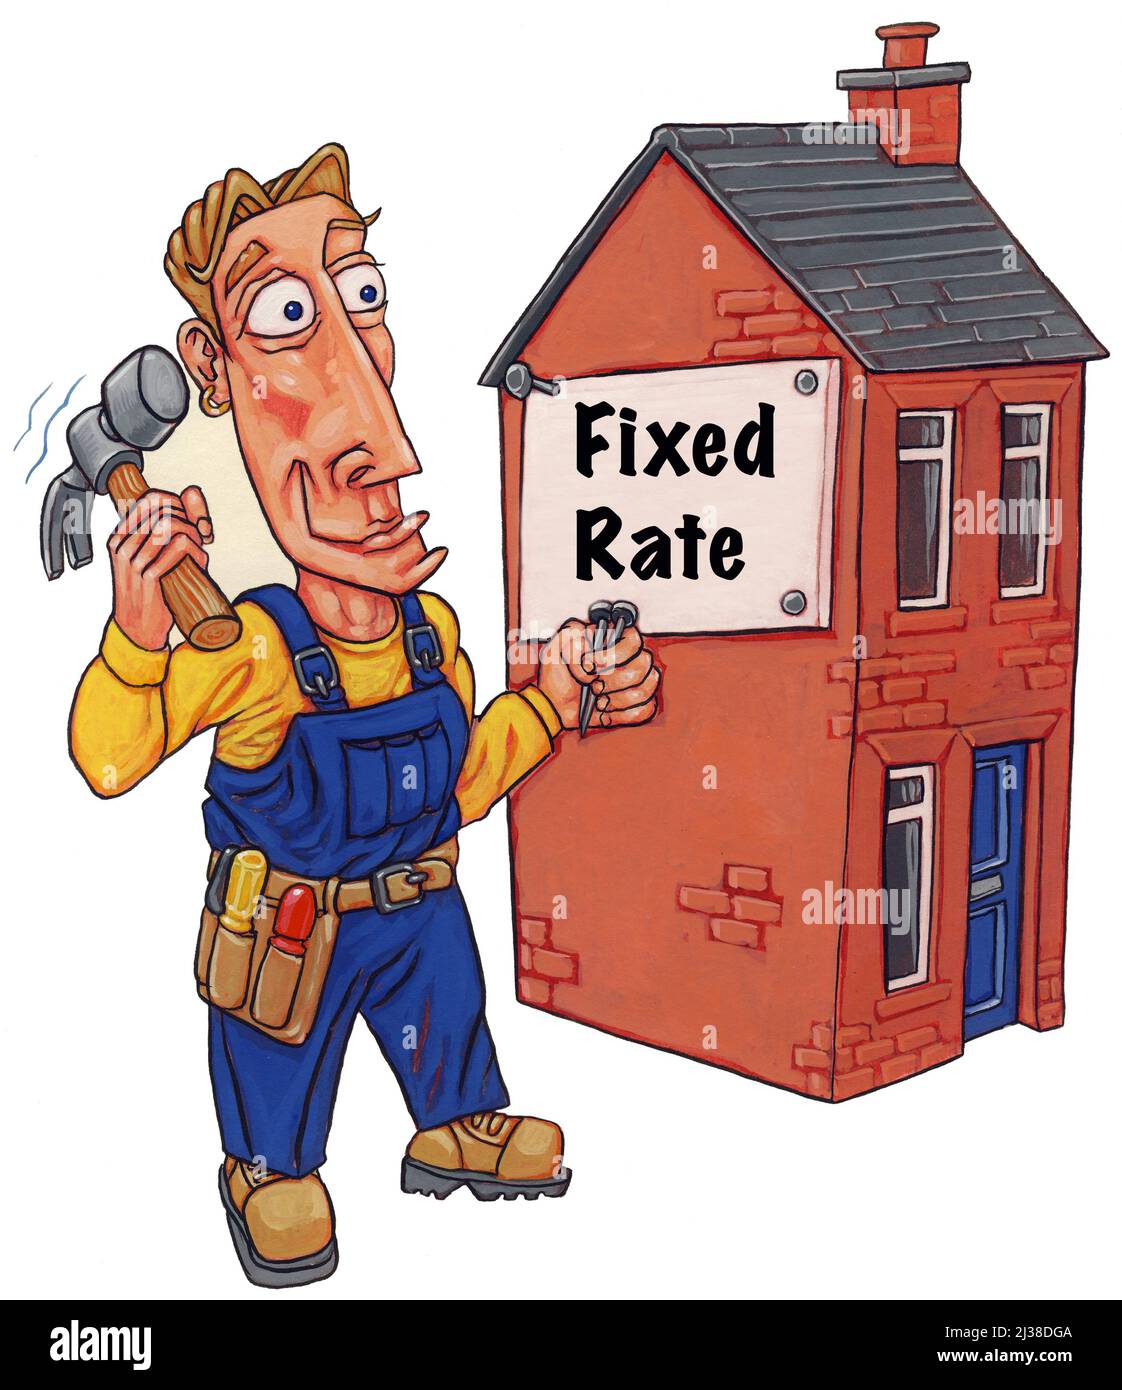 Concept art builder nailing up sign on house saying Fixed Rate, illustrating popularity of fixed rate mortgages as incomes fall & interest rates rise. Stock Photo